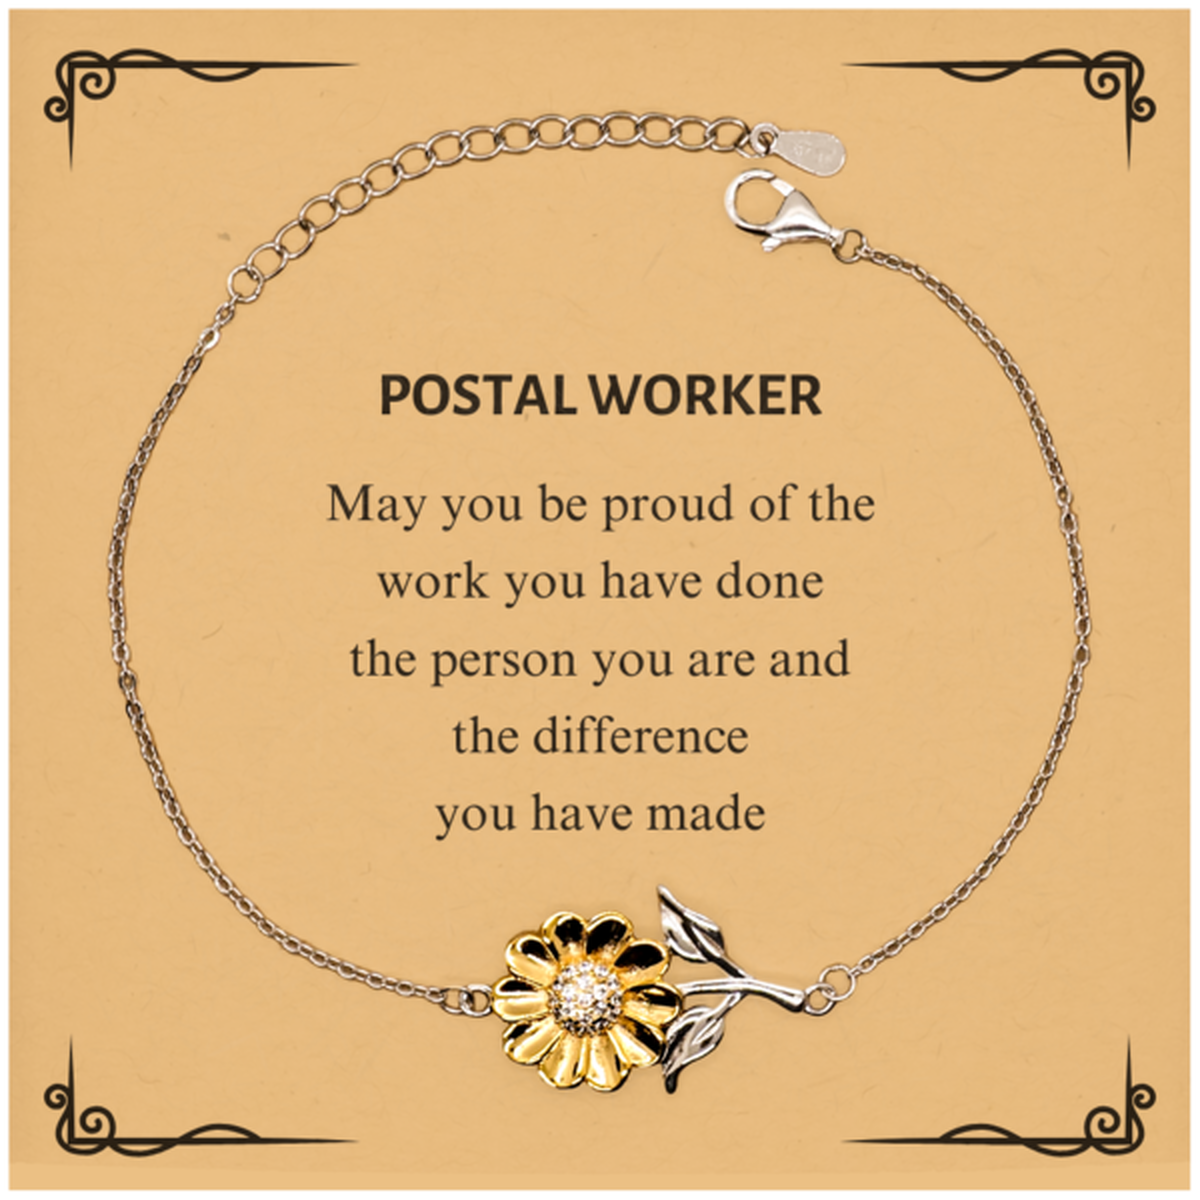 Postal Worker May you be proud of the work you have done, Retirement Postal Worker Sunflower Bracelet for Colleague Appreciation Gifts Amazing for Postal Worker